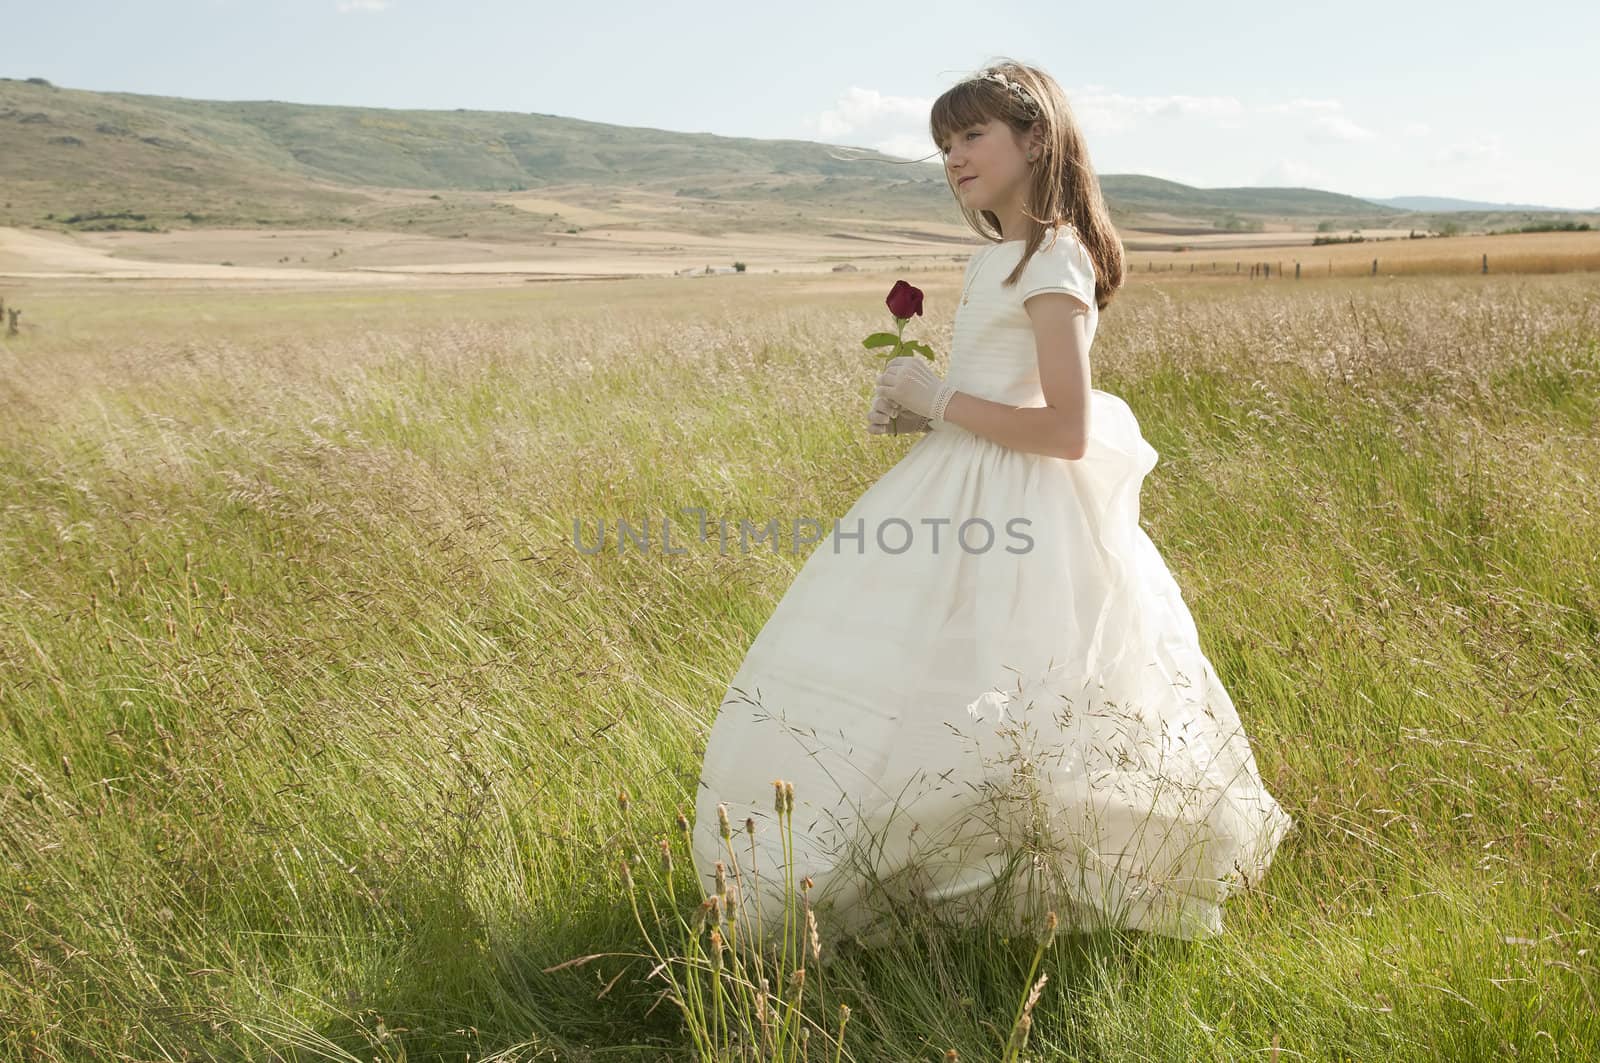 girl wearing first communion dress in the meadow